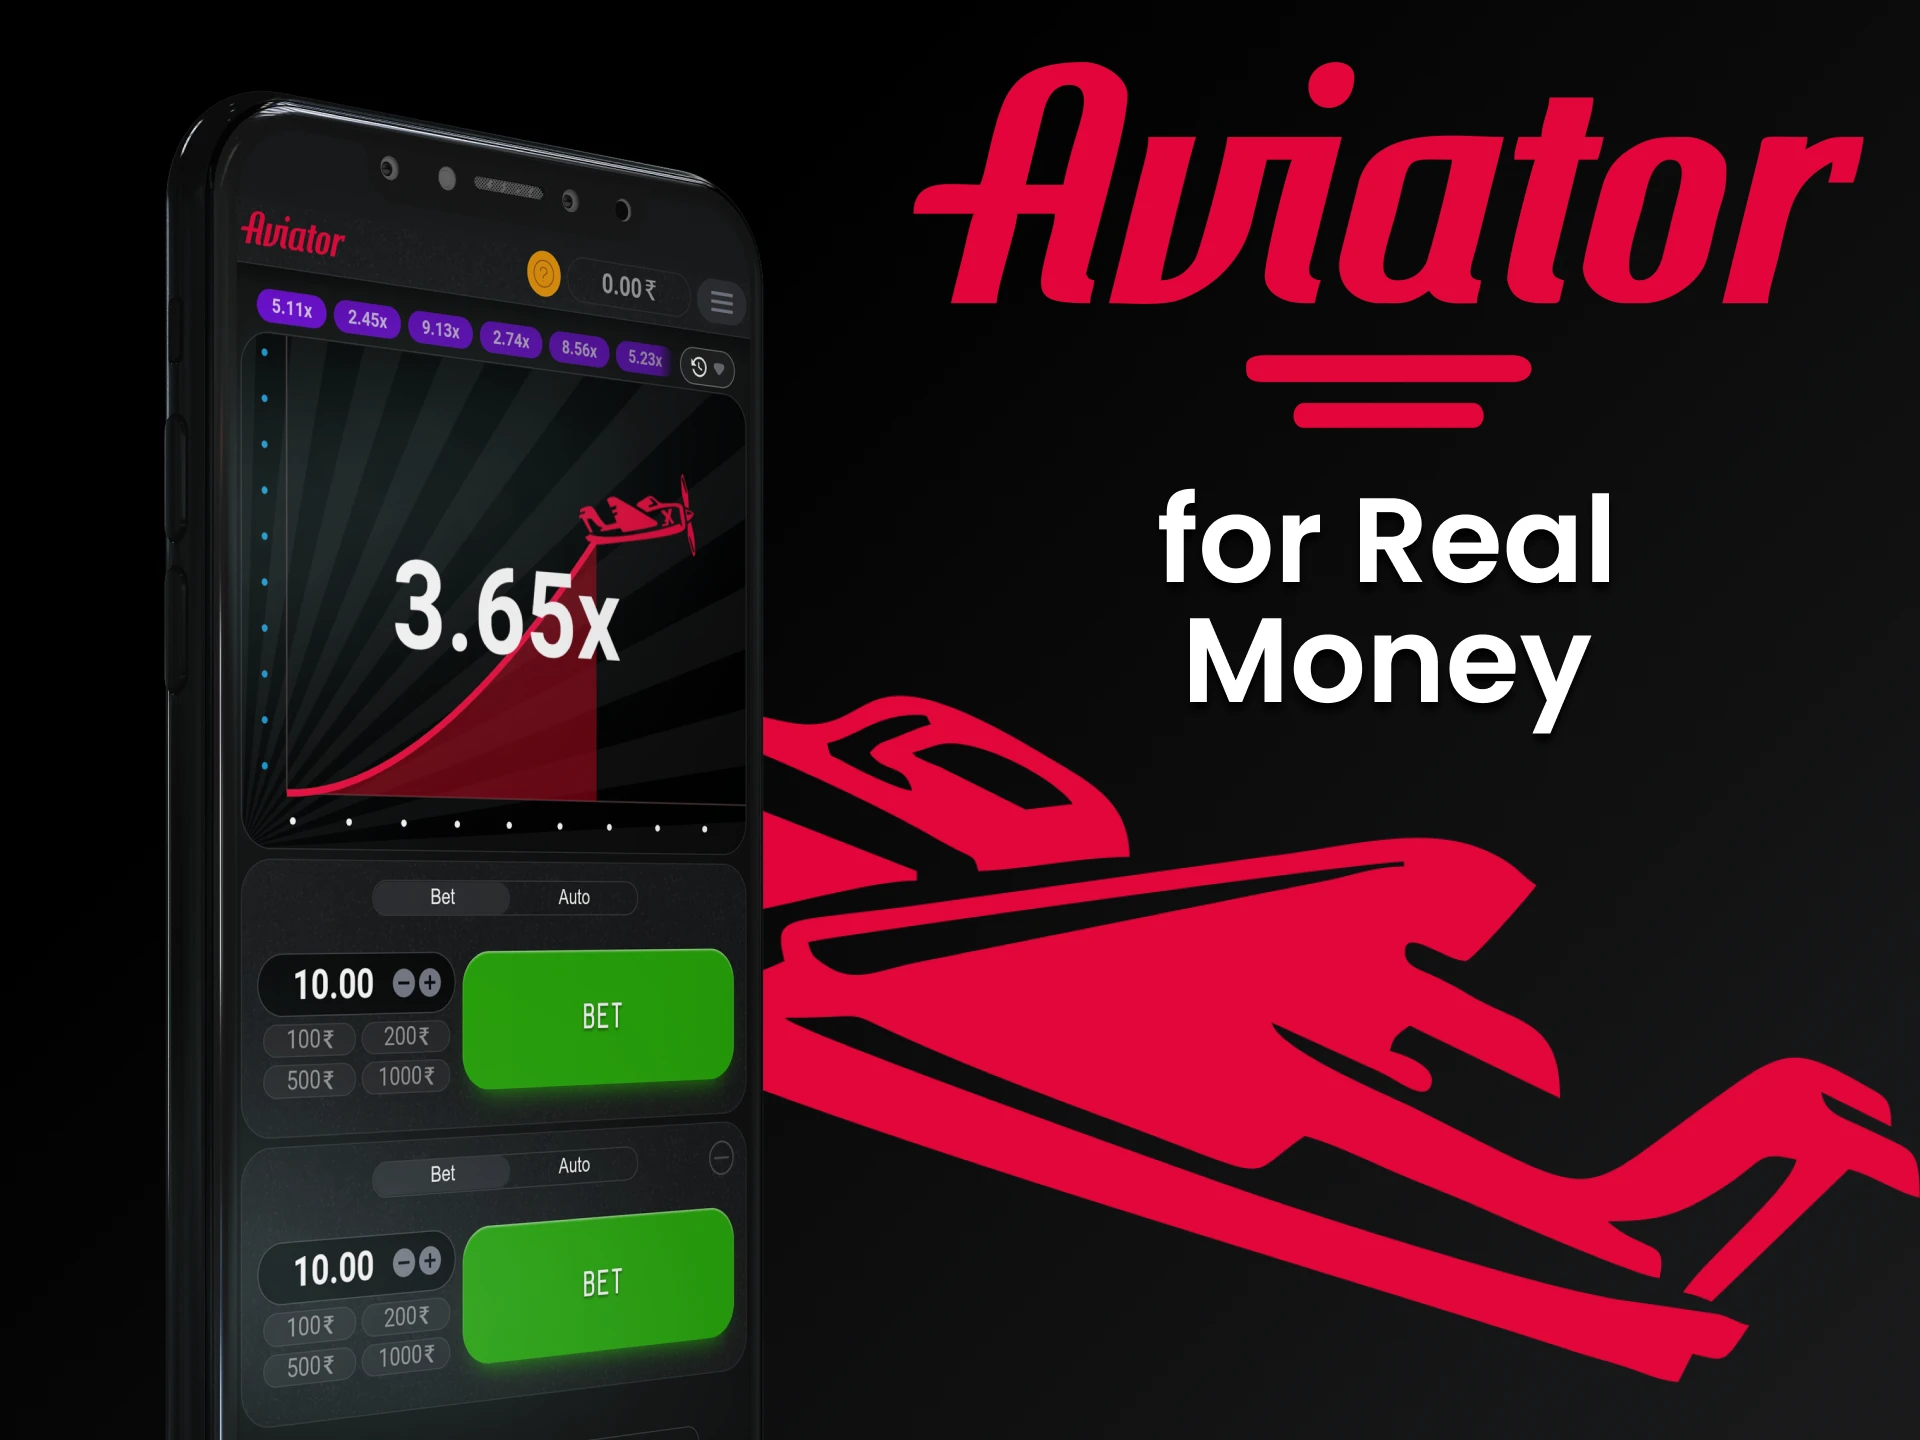 On the mobile app, you can play Aviator for real money.